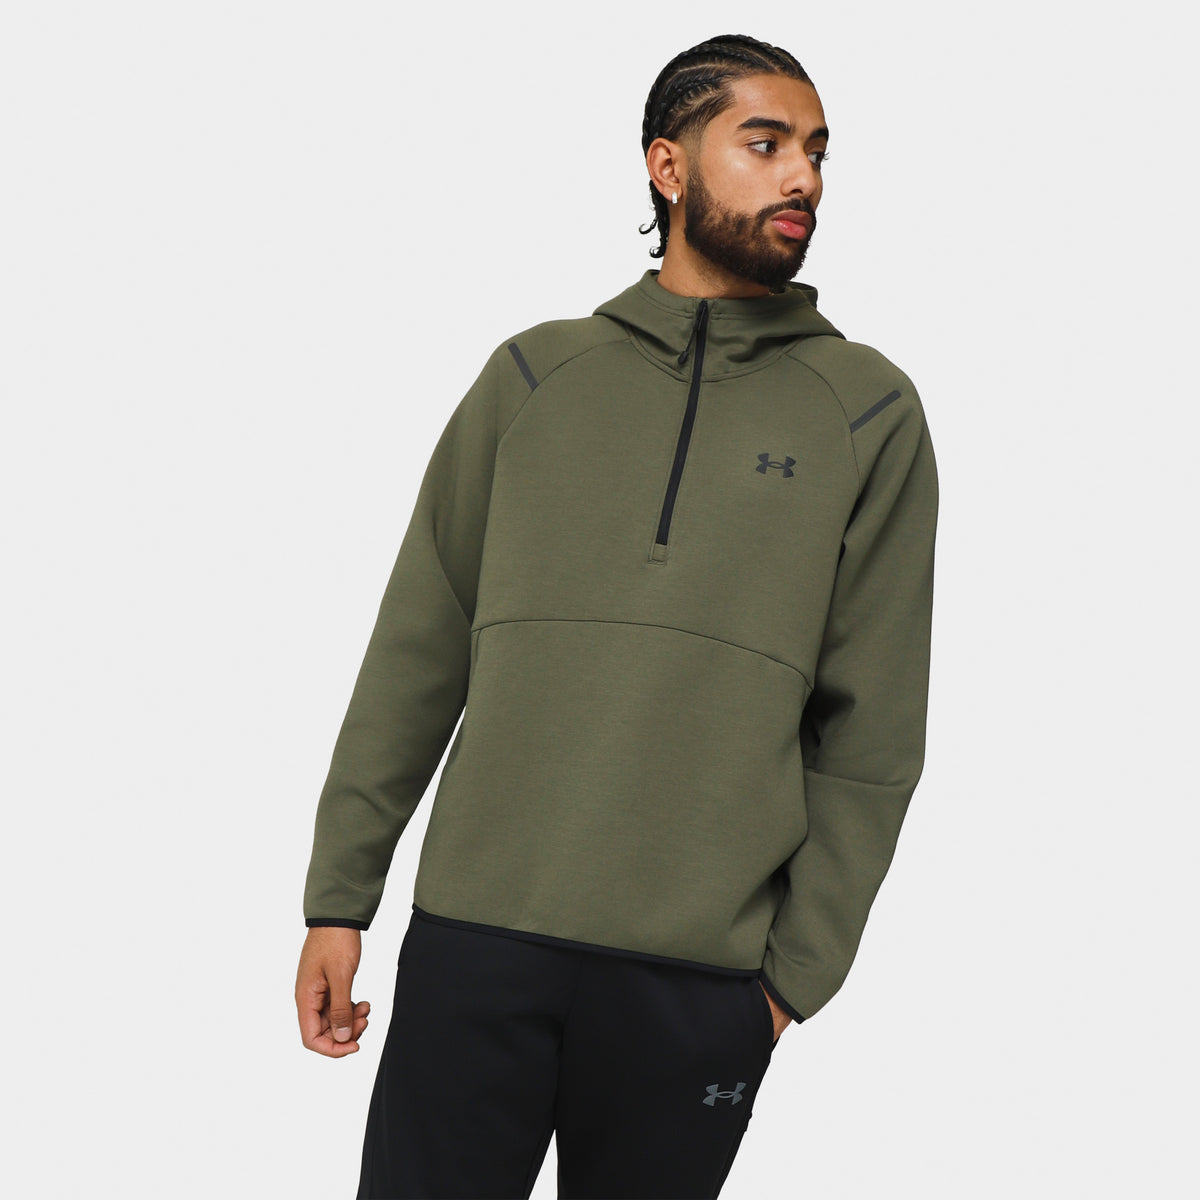 Under Armour Unstoppable Fleece Pullover Hoodie Marine Green / Black